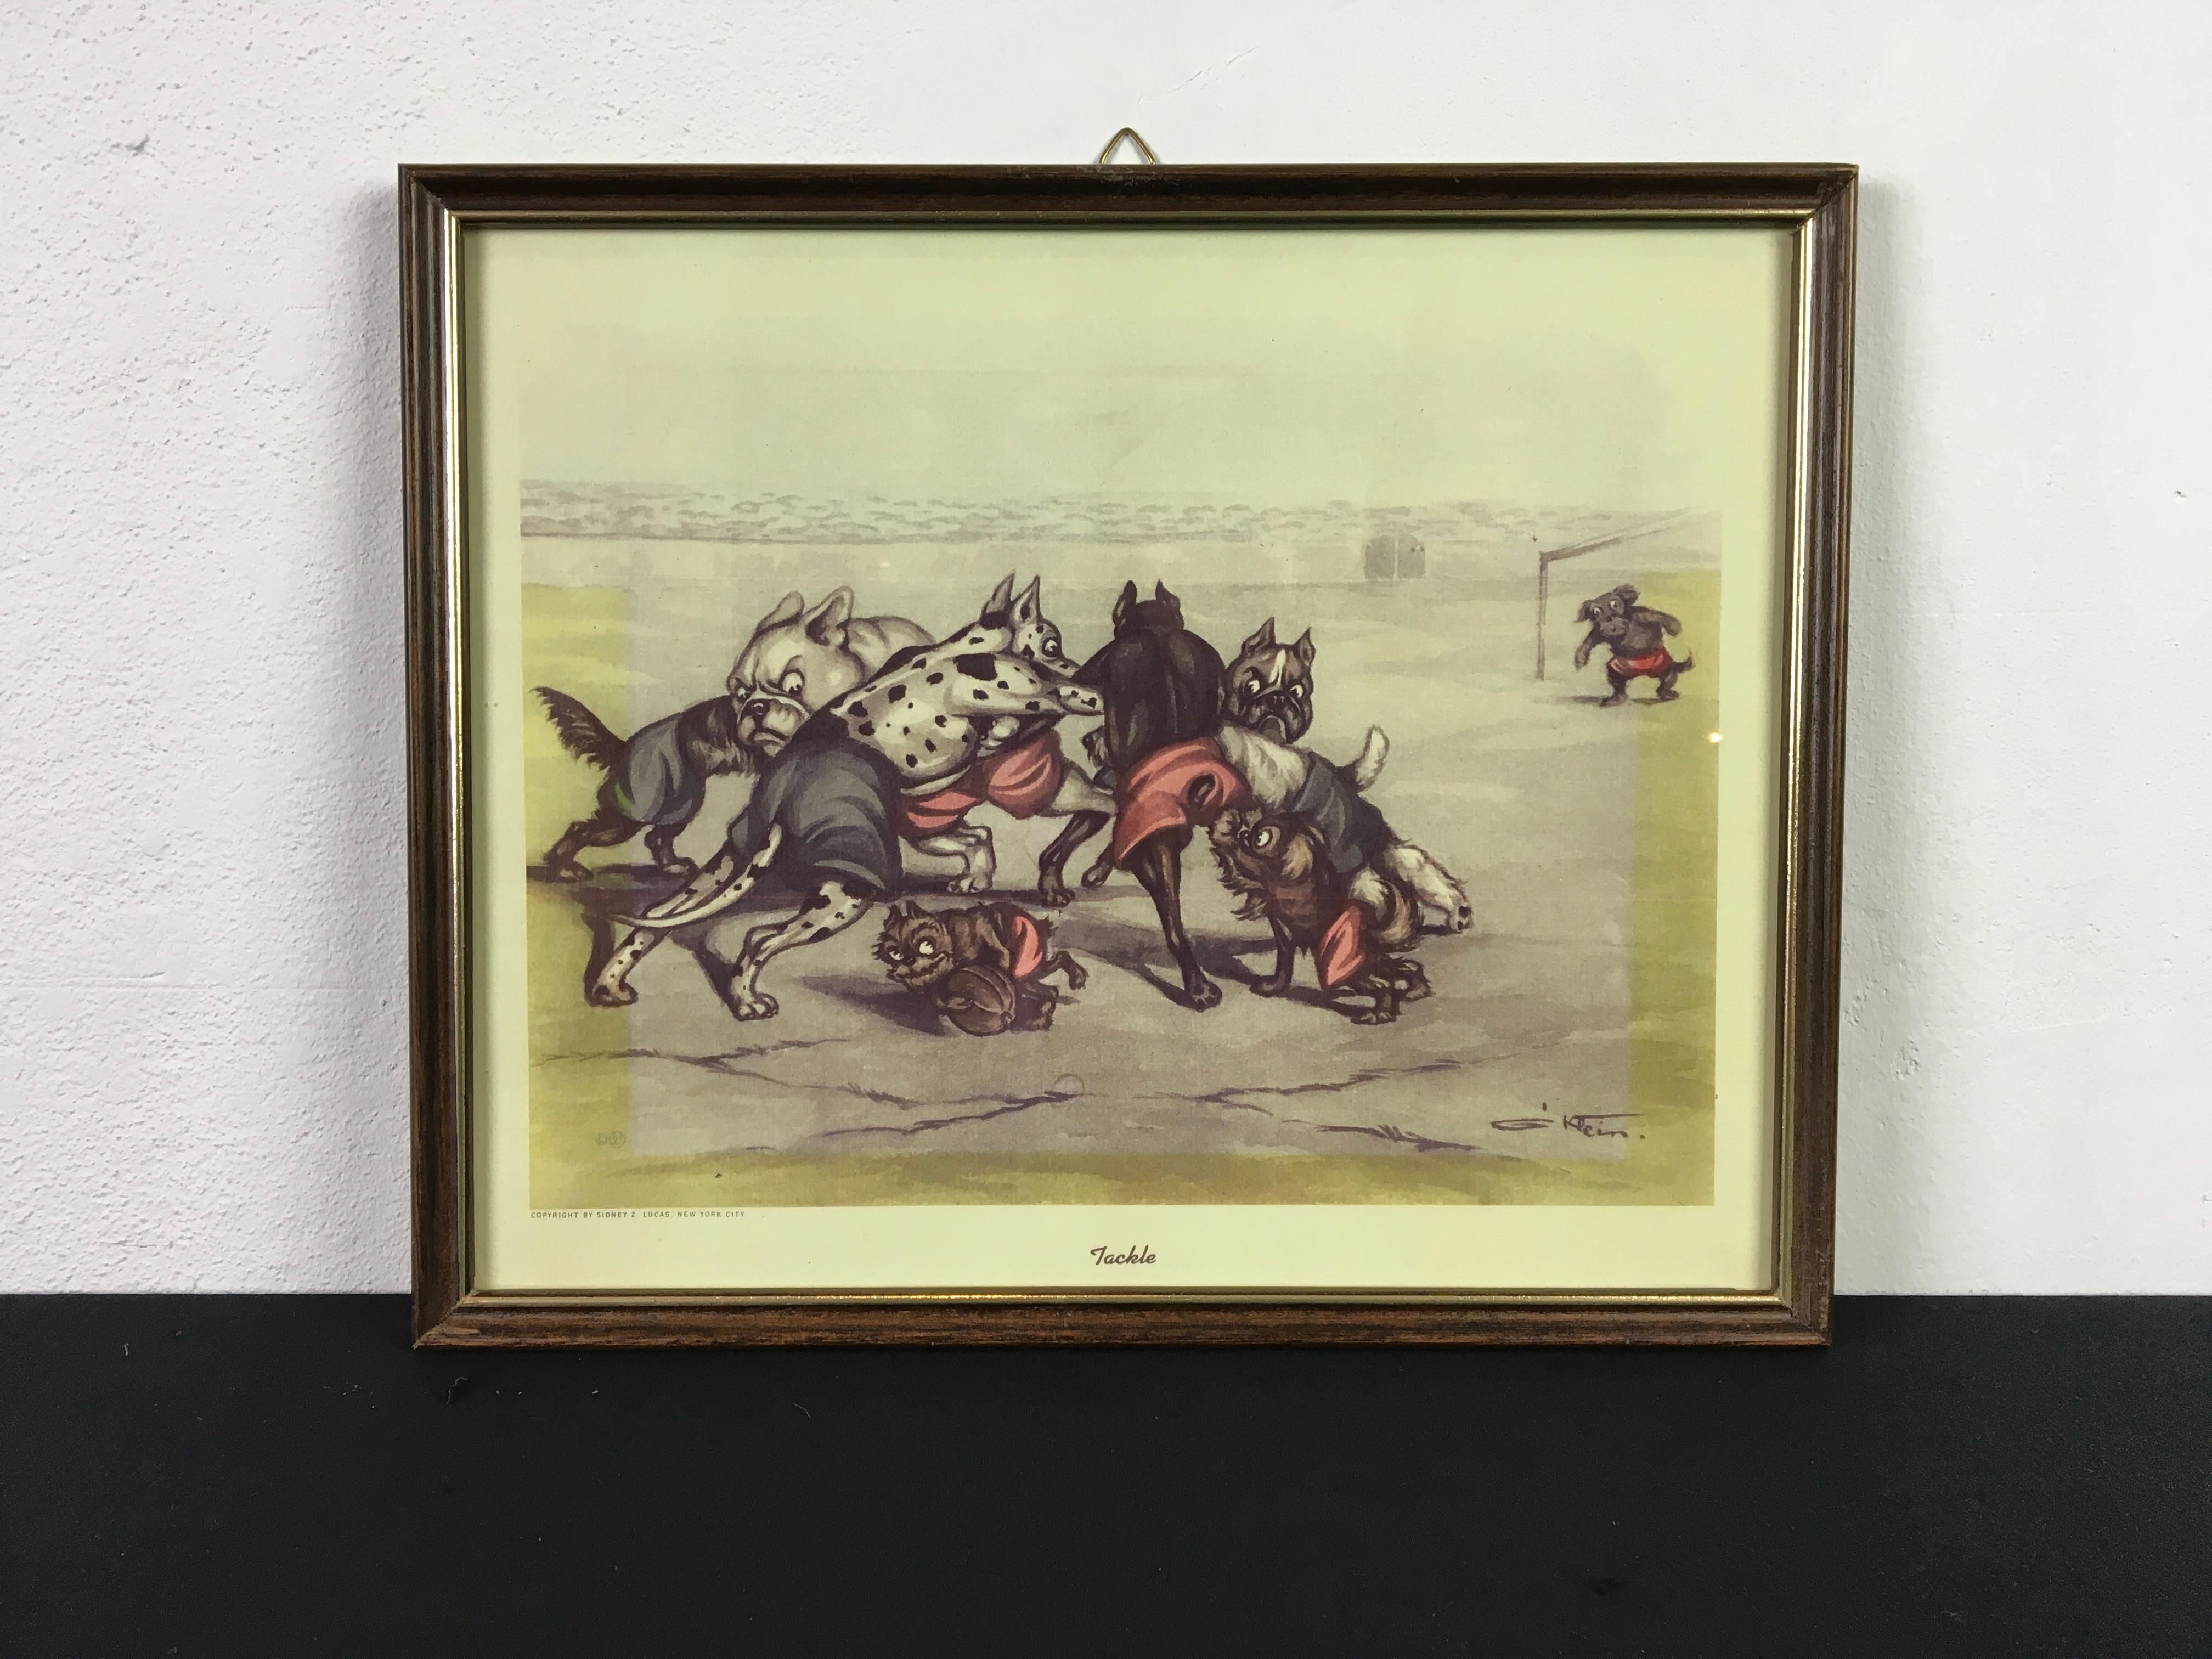 Framed print of dogs playing rugby. 
Hereby a scene of a rugby tackle where the little one escapes direction goal. 
All the rugby players are dogs : French Bulldog, English Bulldog, Harlequin Great Dane, Schnauzer, etc ... 
Ilustrated by Boris O'